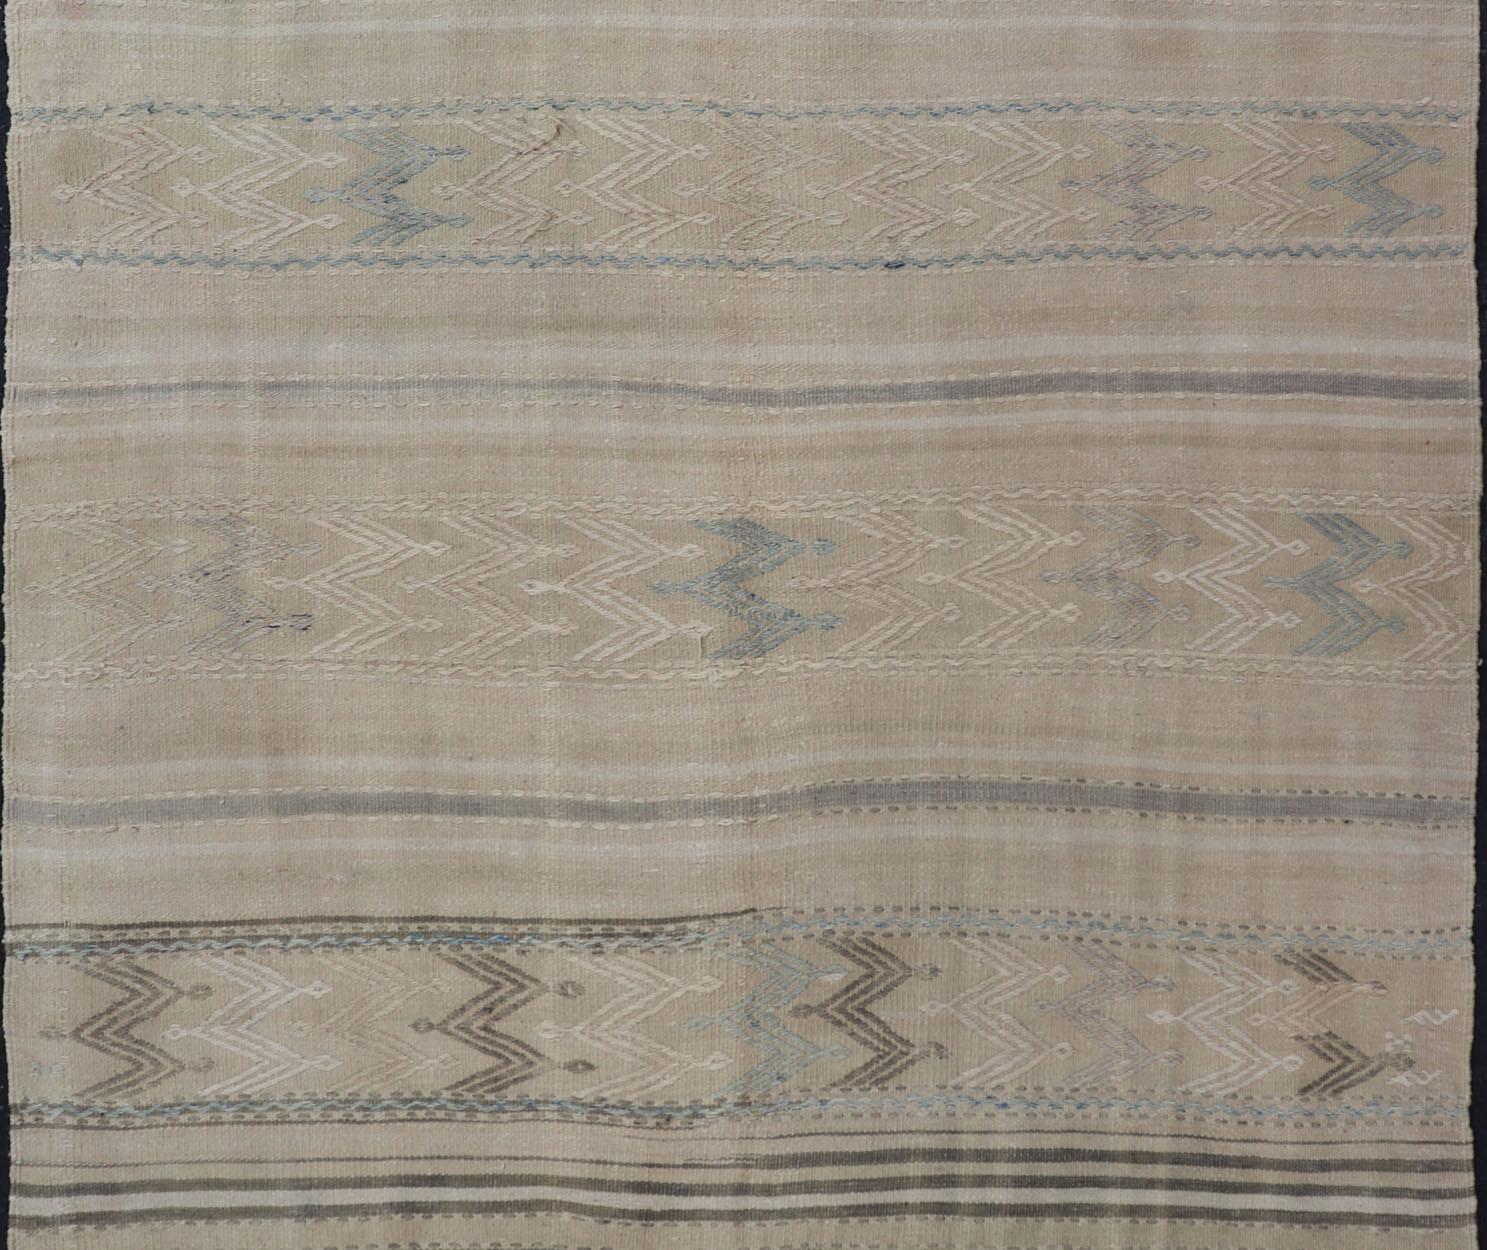 Turkish Flat-Weave Kilim with Tribal Embroideries in Taupe, Tan, Blue-Gray Color In Good Condition For Sale In Atlanta, GA